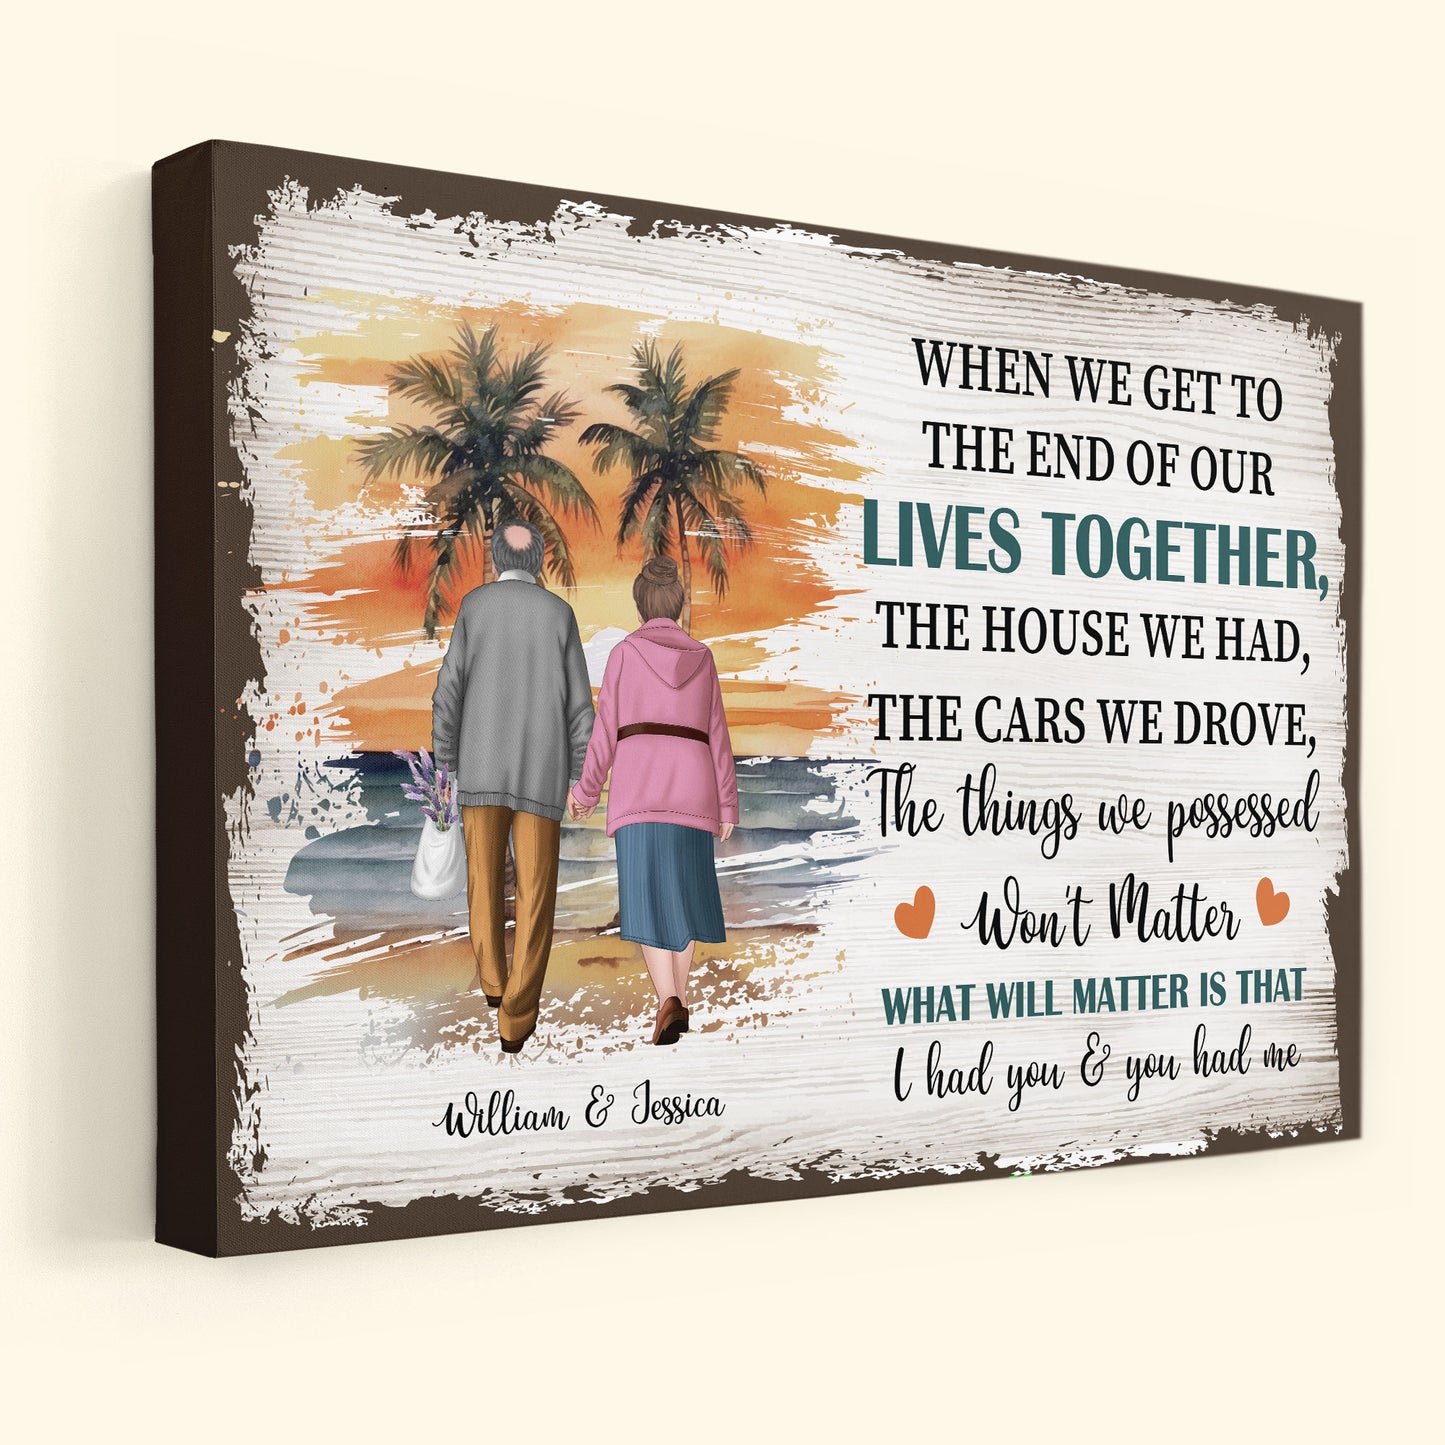 When We Get To The End Of Our Lives Together - Personalized Wrapped Canvas